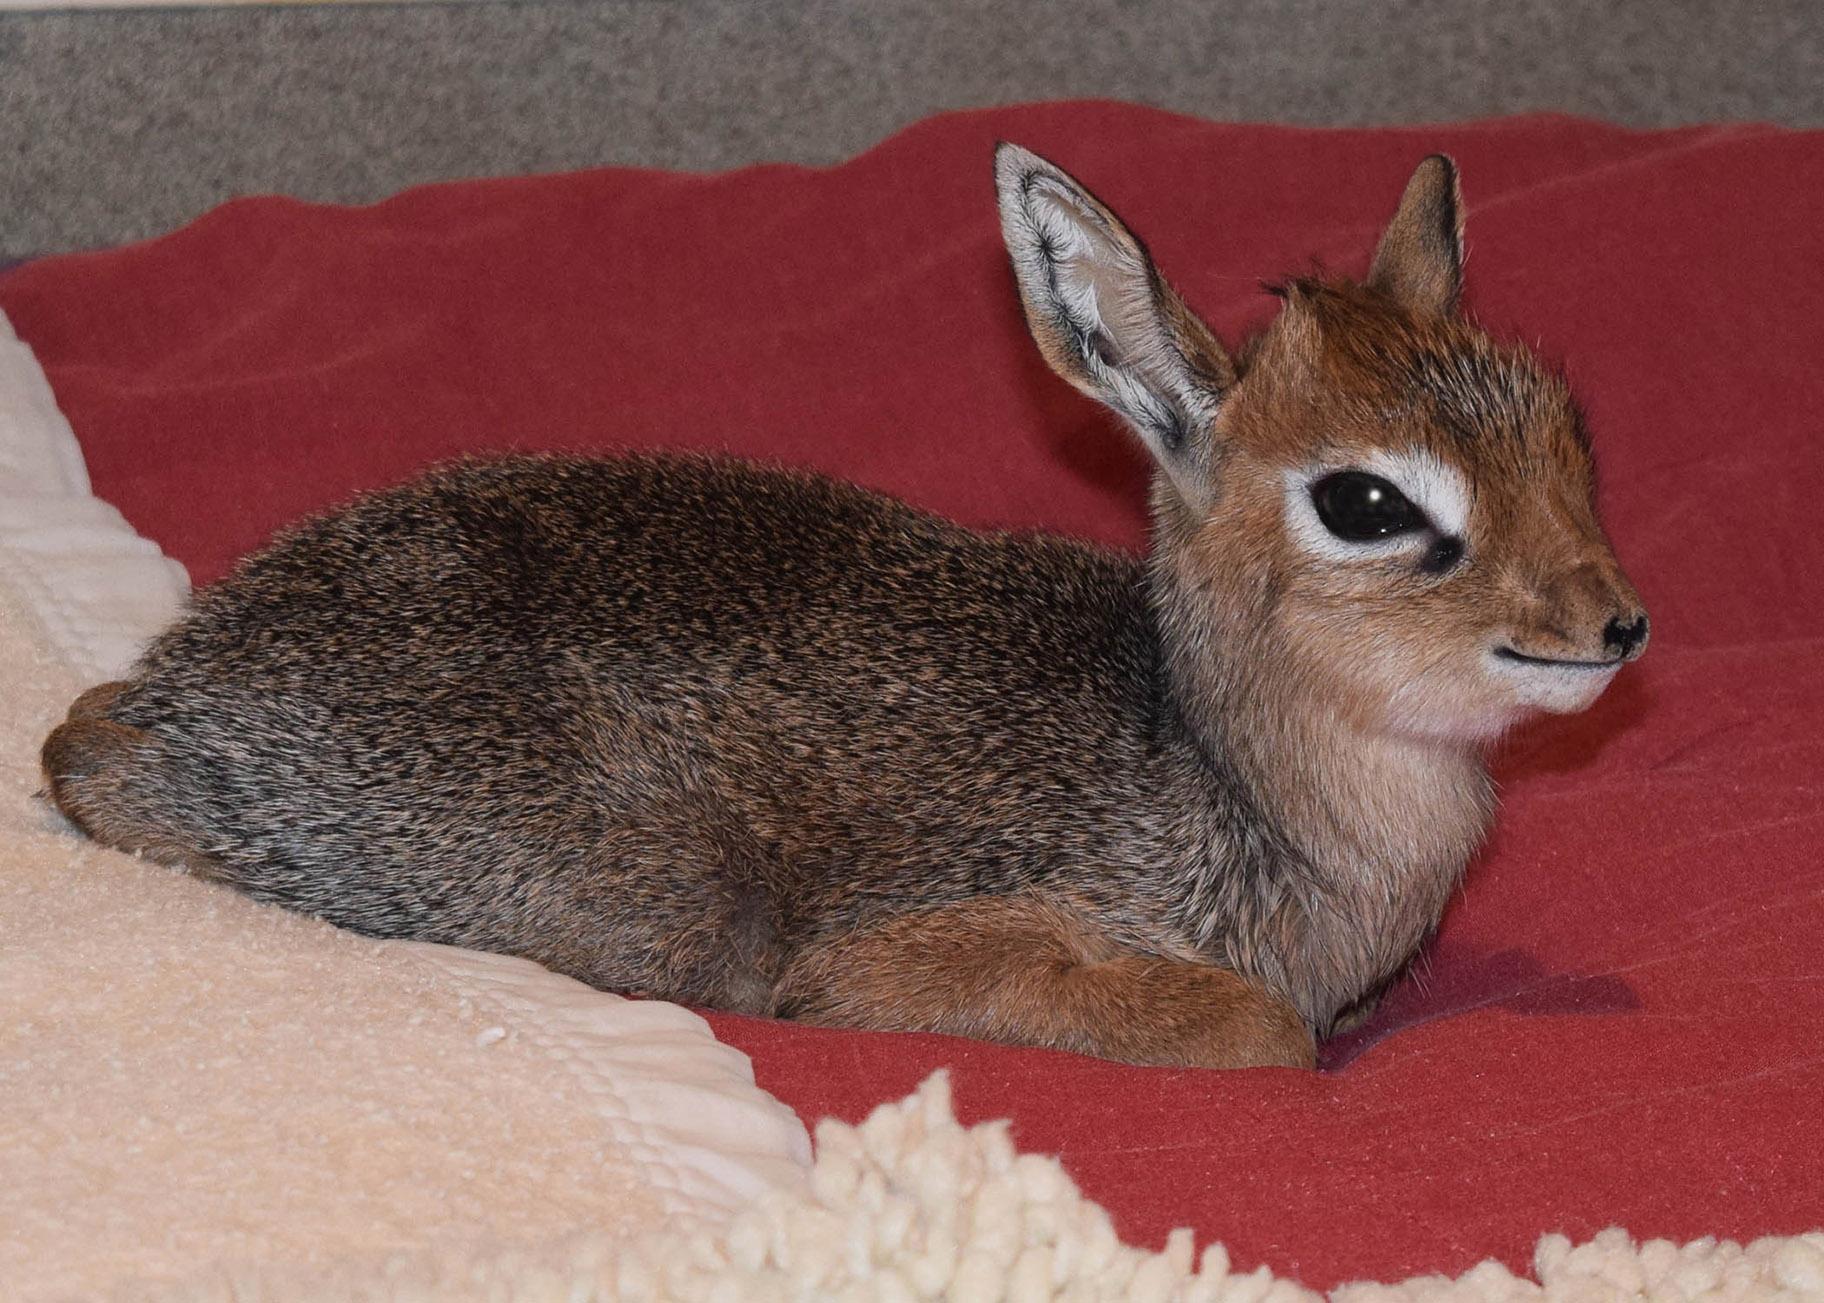 Valentino, a small African antelope, was born Thursday at Brookfield Zoo. (Cathy Bazzoni / Chicago Zoological Society)